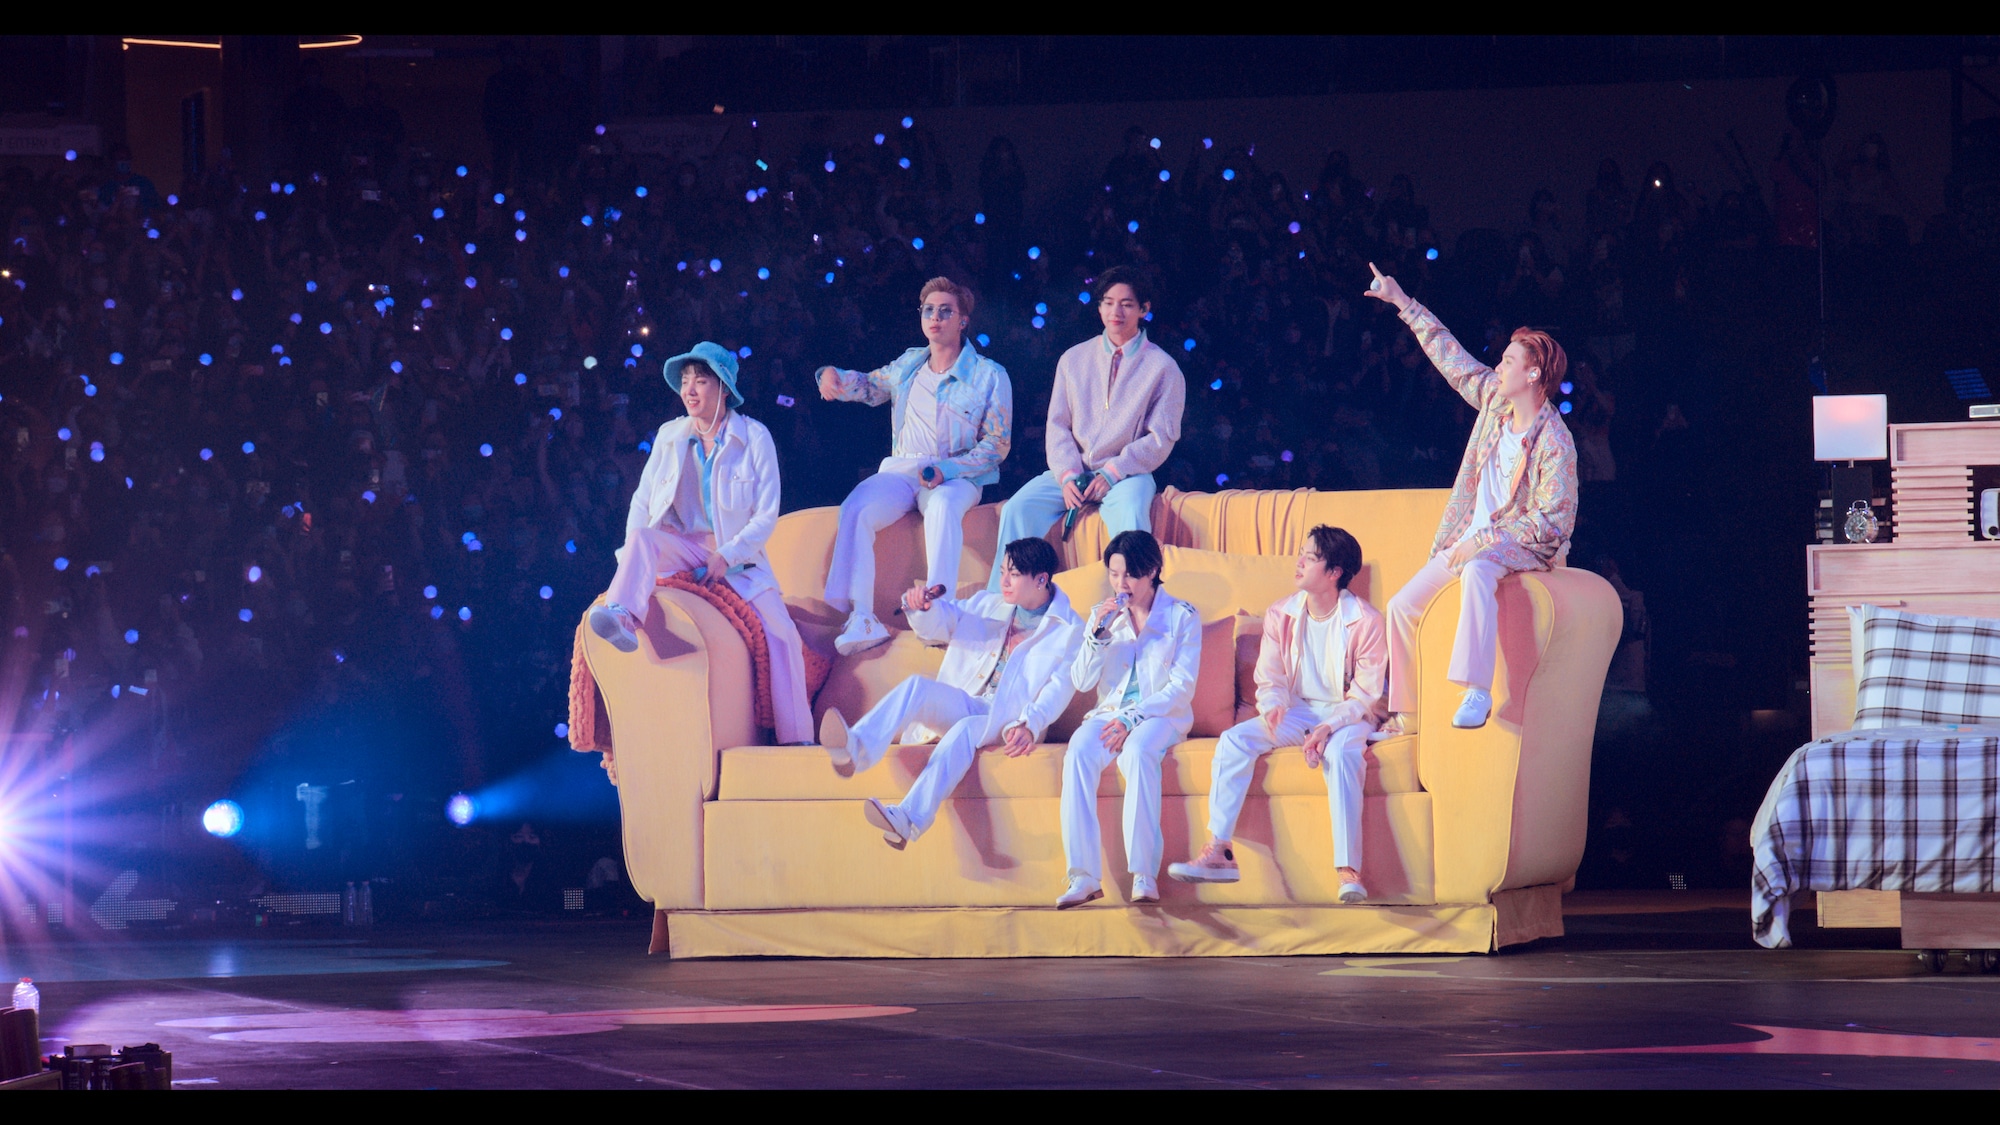 BTS permission to dance concert movie - featuring bts on an oversized yellow sofa